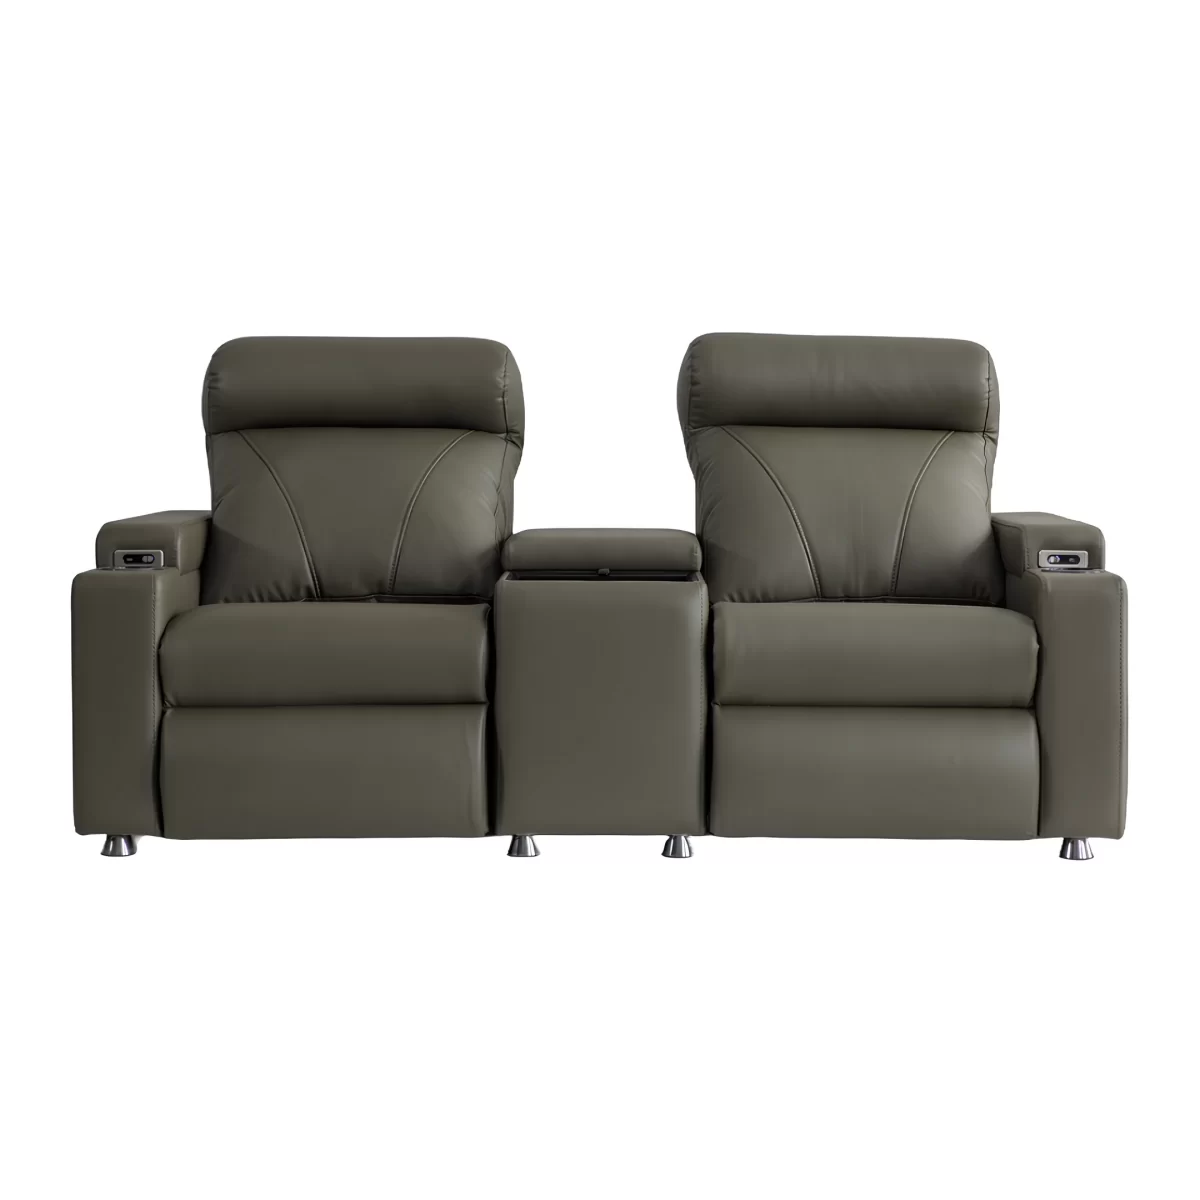 zero double reclining sofa for home theater seating cupholder usb electric 5